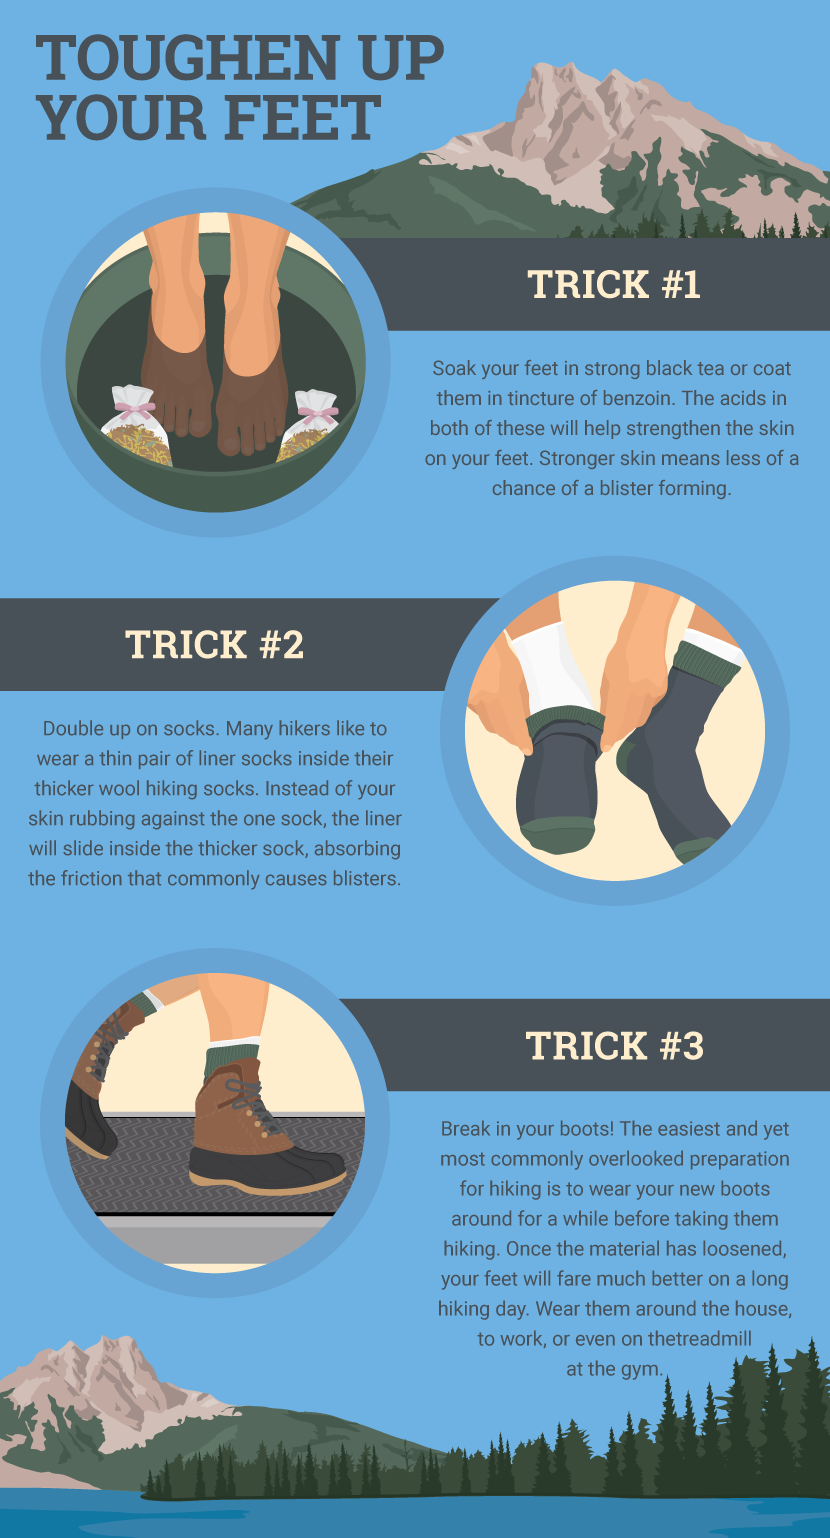 Toughen Up Your Feet - Train For Any Hike